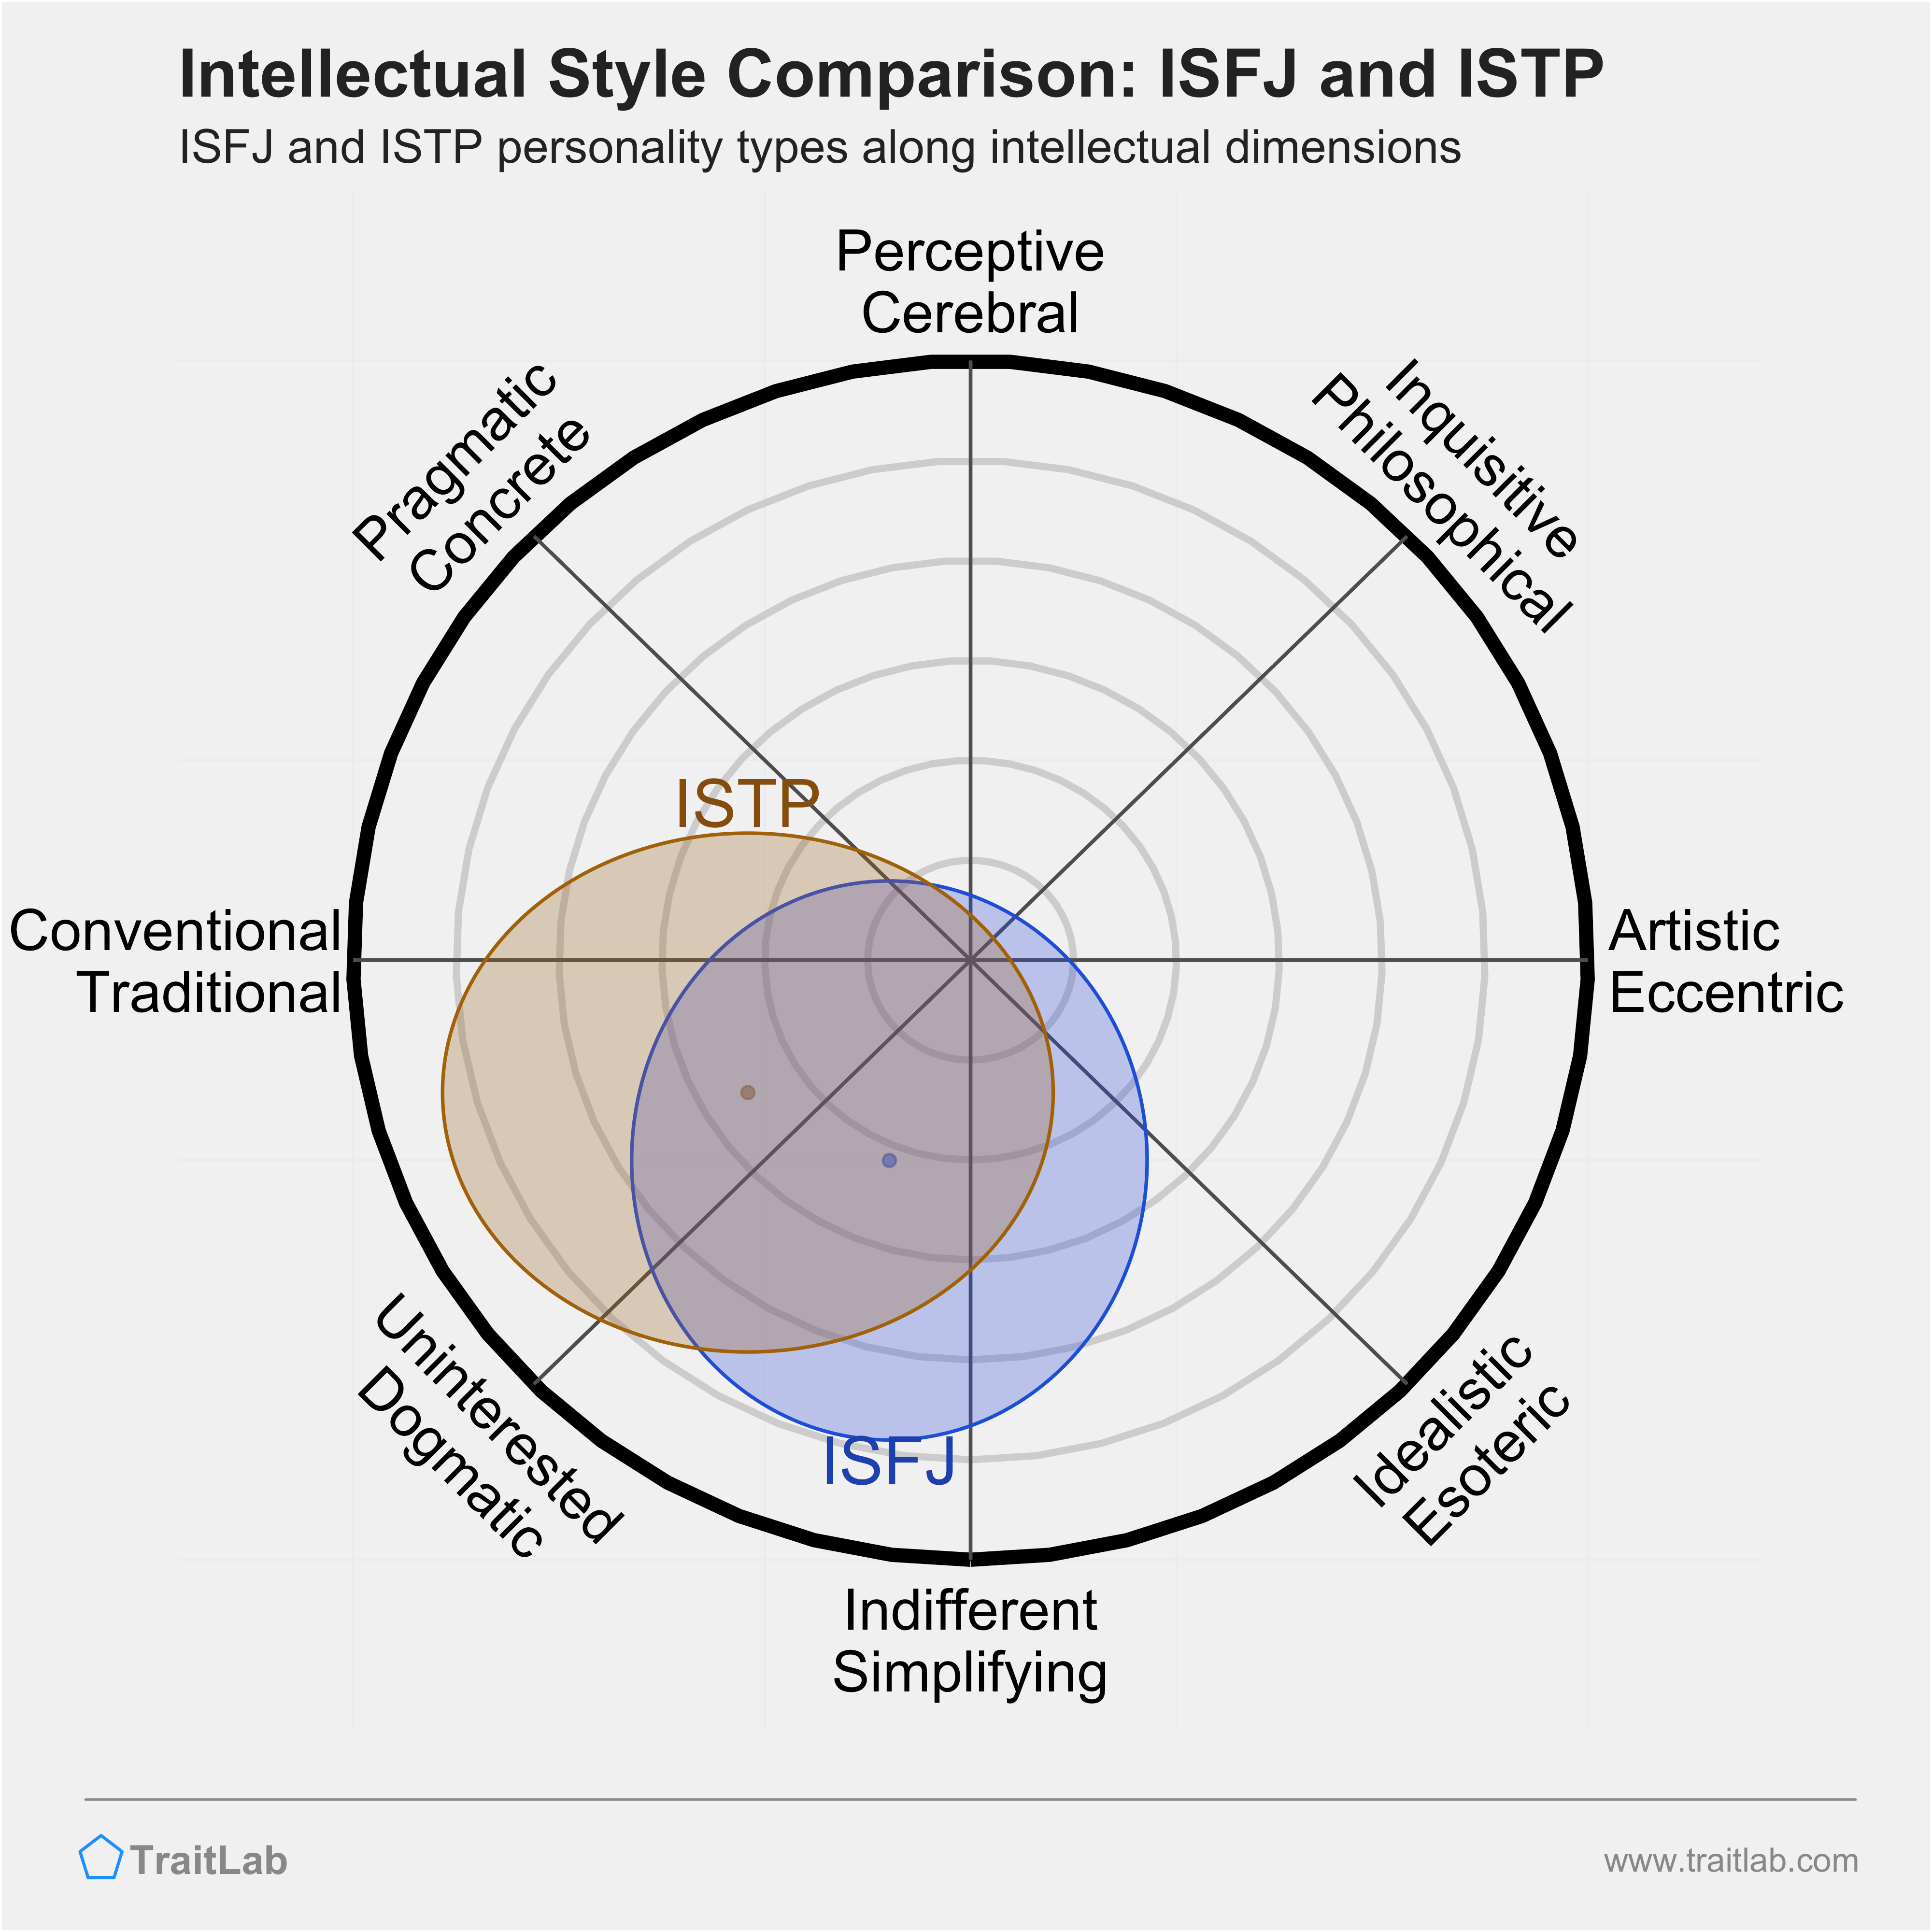 ISFJ and ISTP comparison across intellectual dimensions